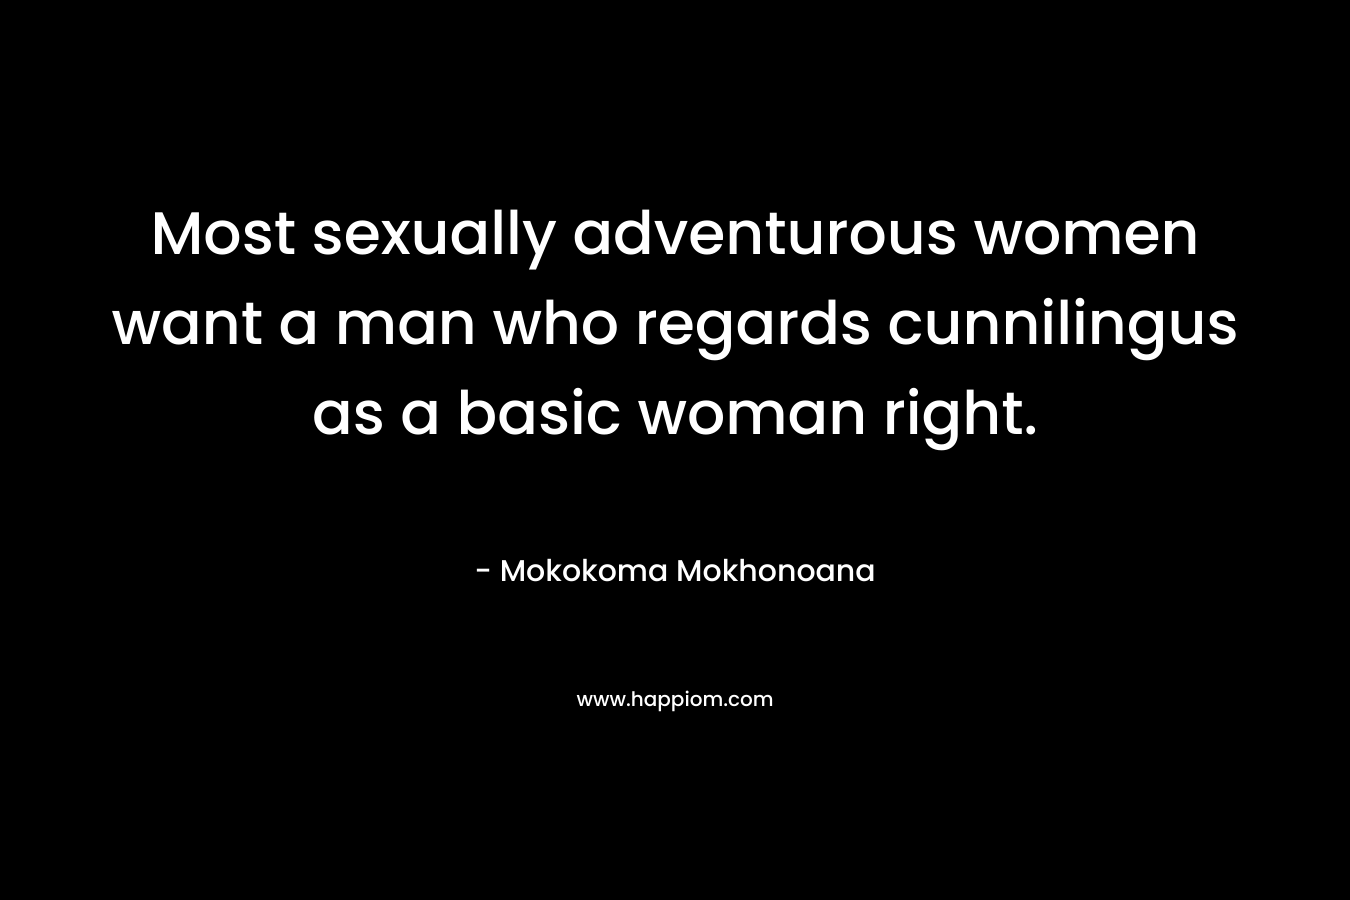 Most sexually adventurous women want a man who regards cunnilingus as a basic woman right.